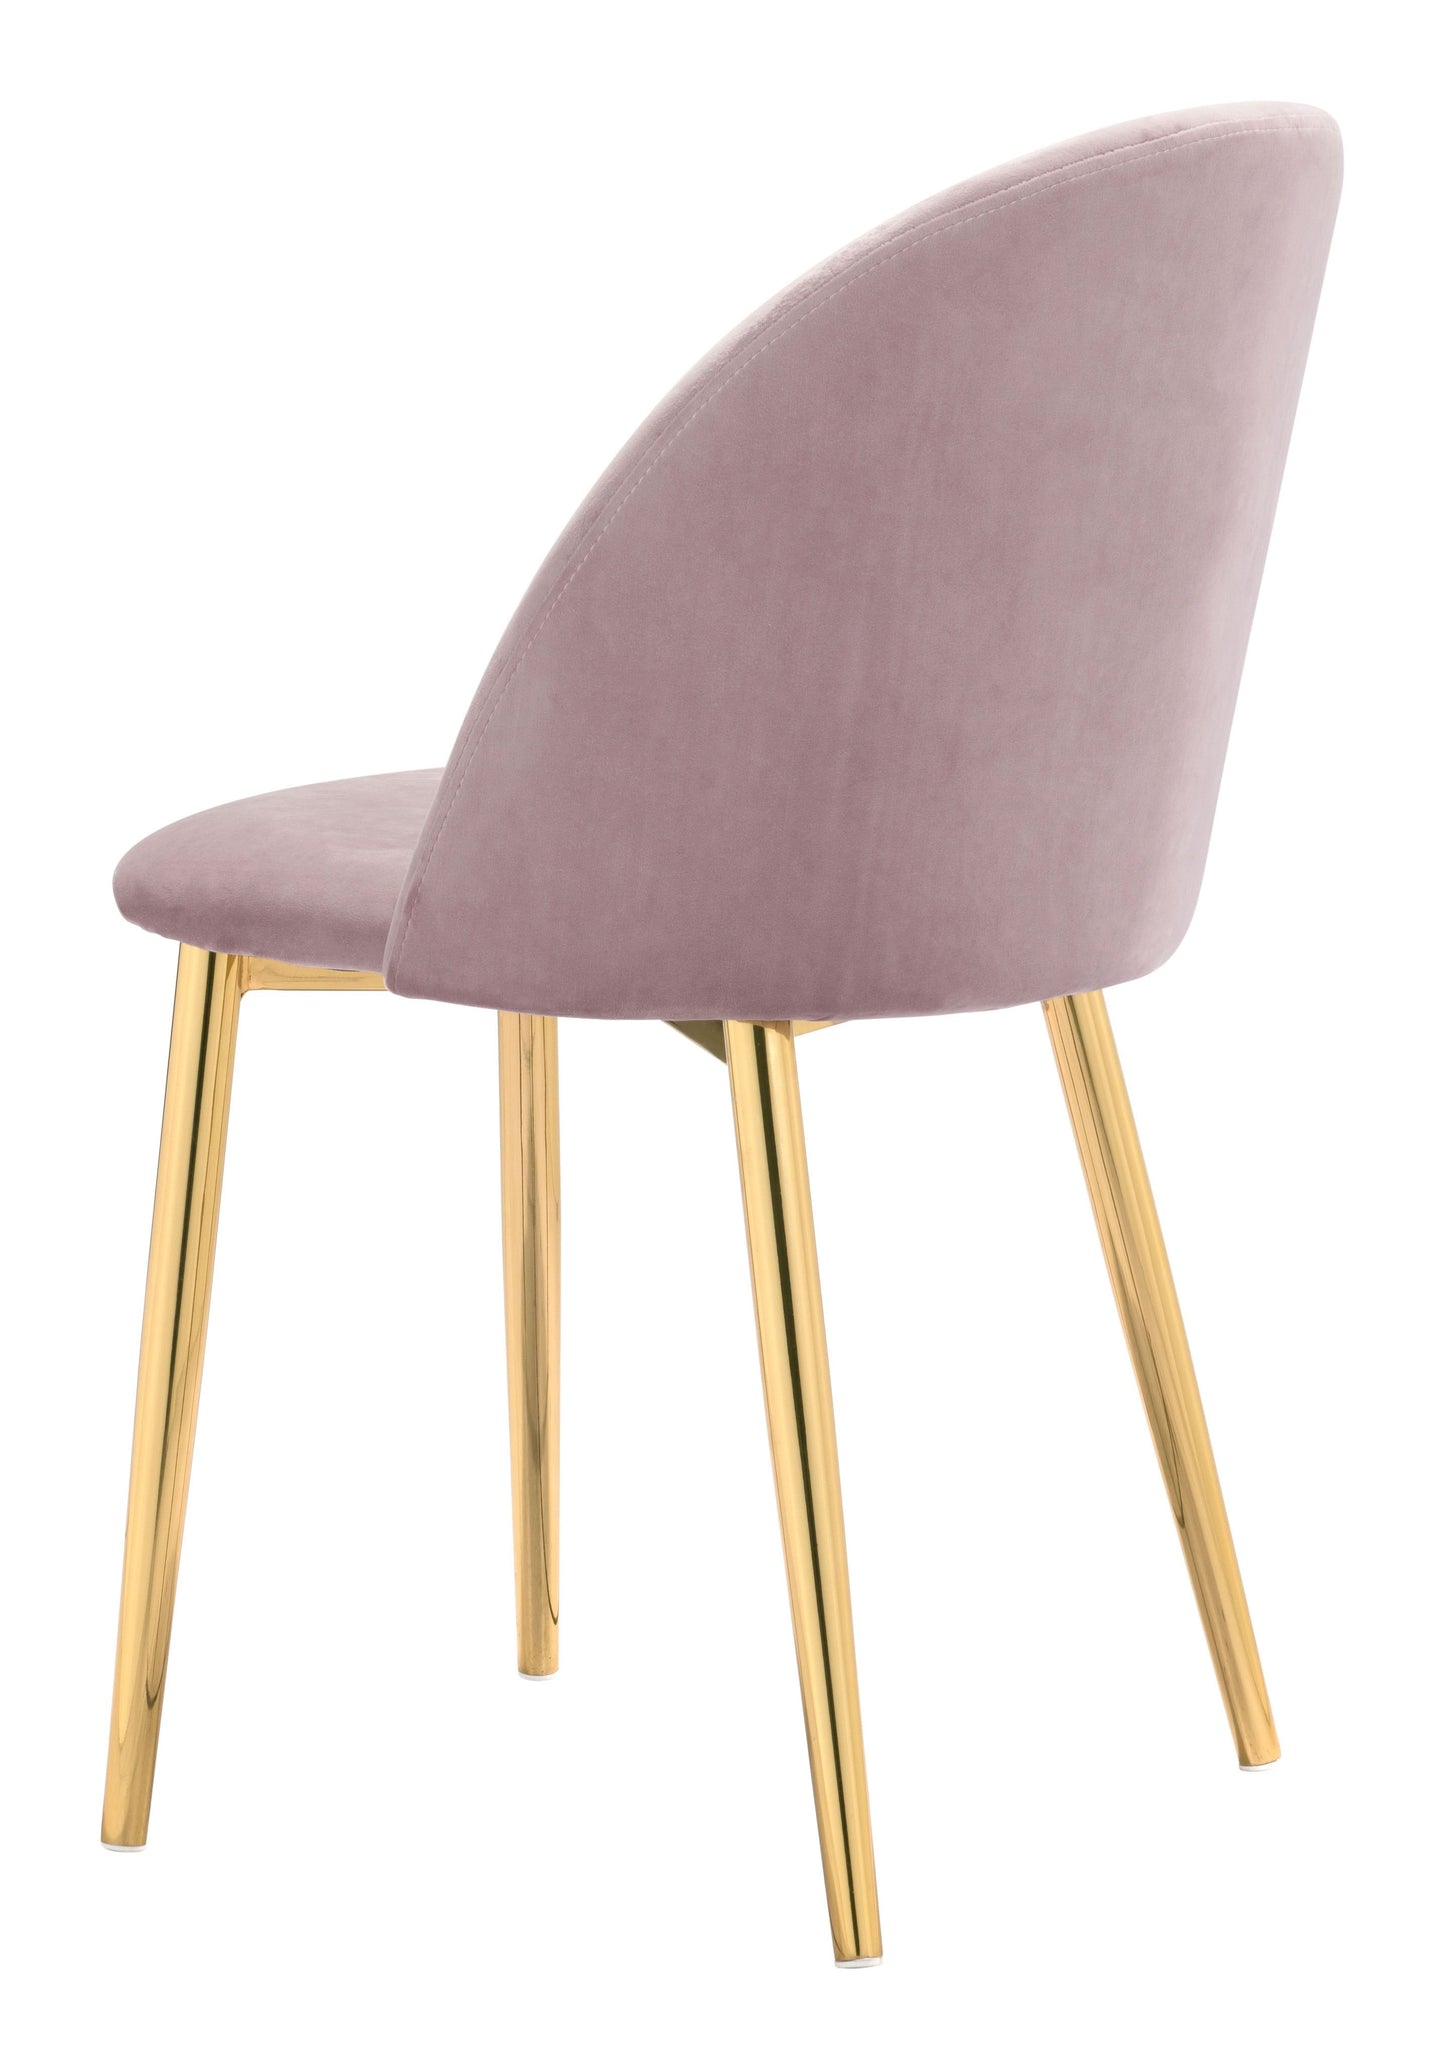 Cozy Dining Chair Pink